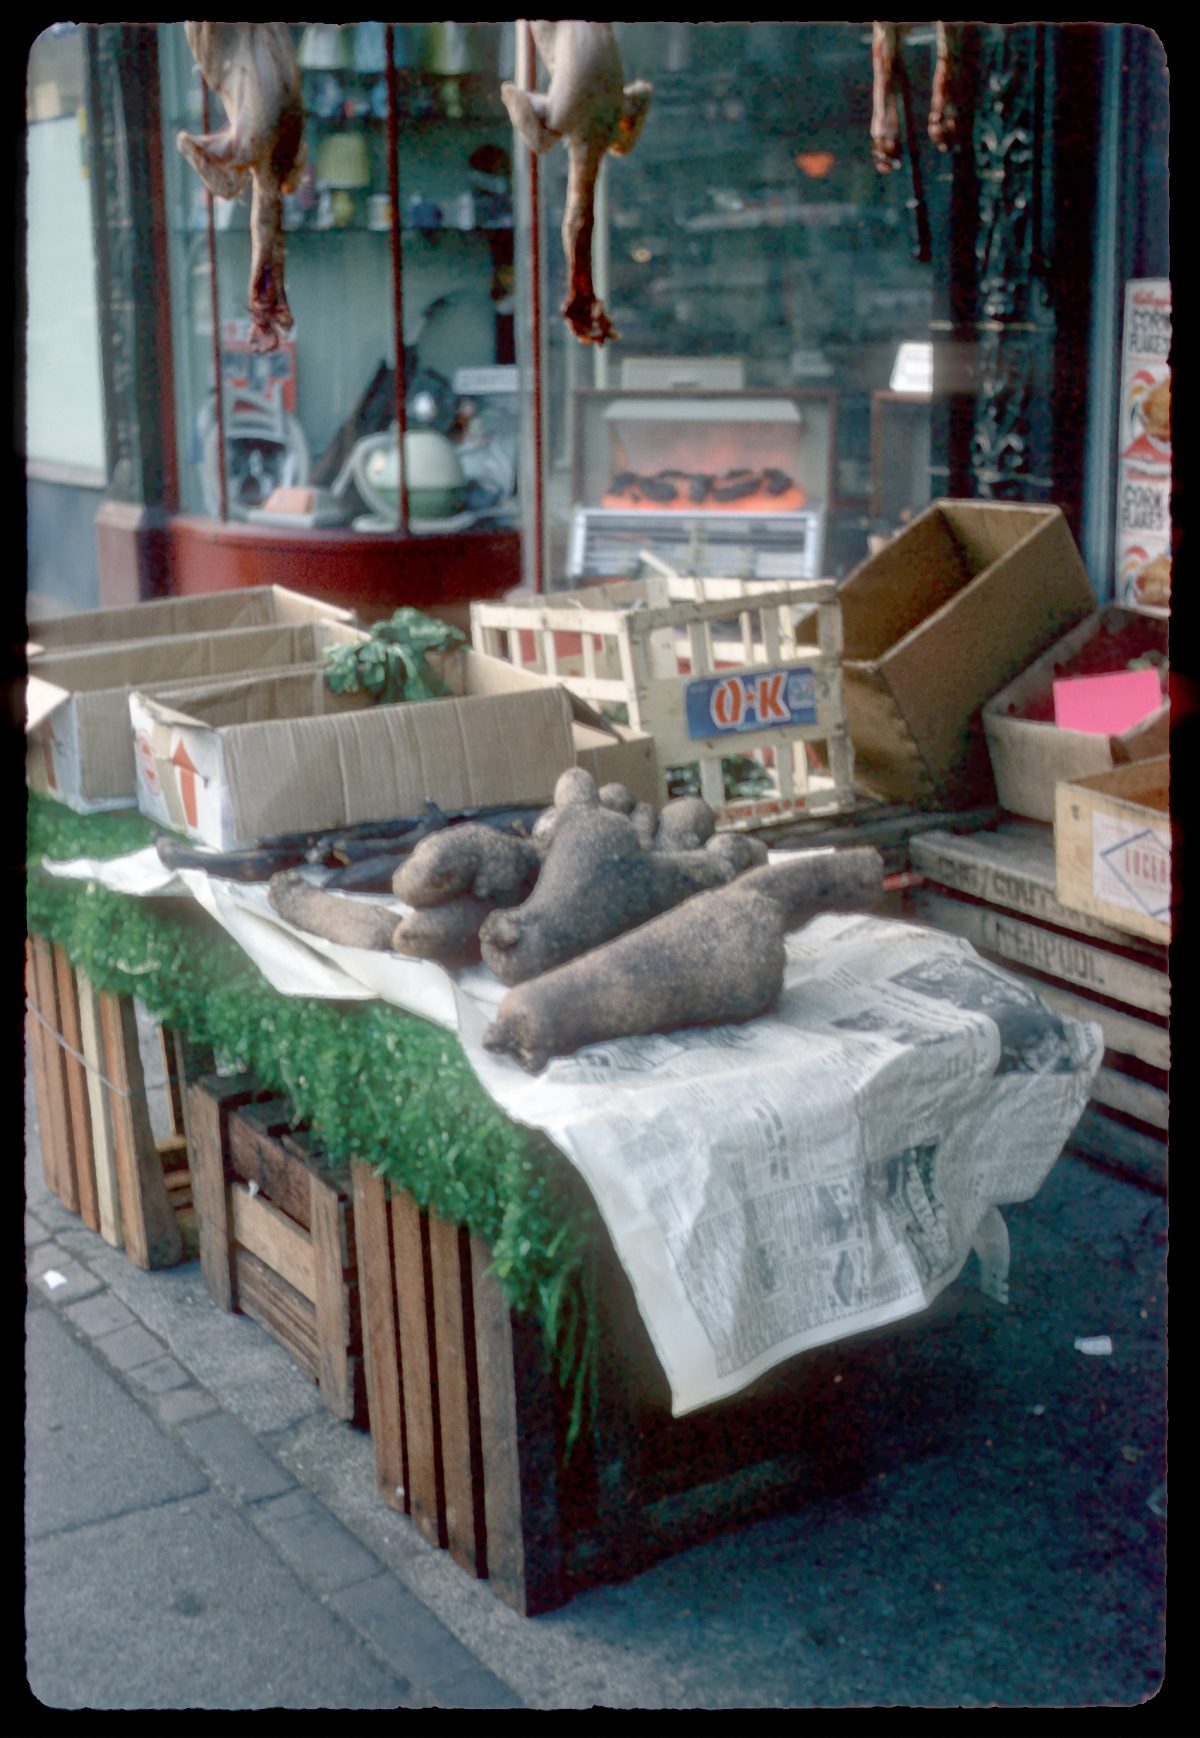 Soho Road, in the Holliday Road area. The yams are priced at 10 pence per pound. March 2 1968